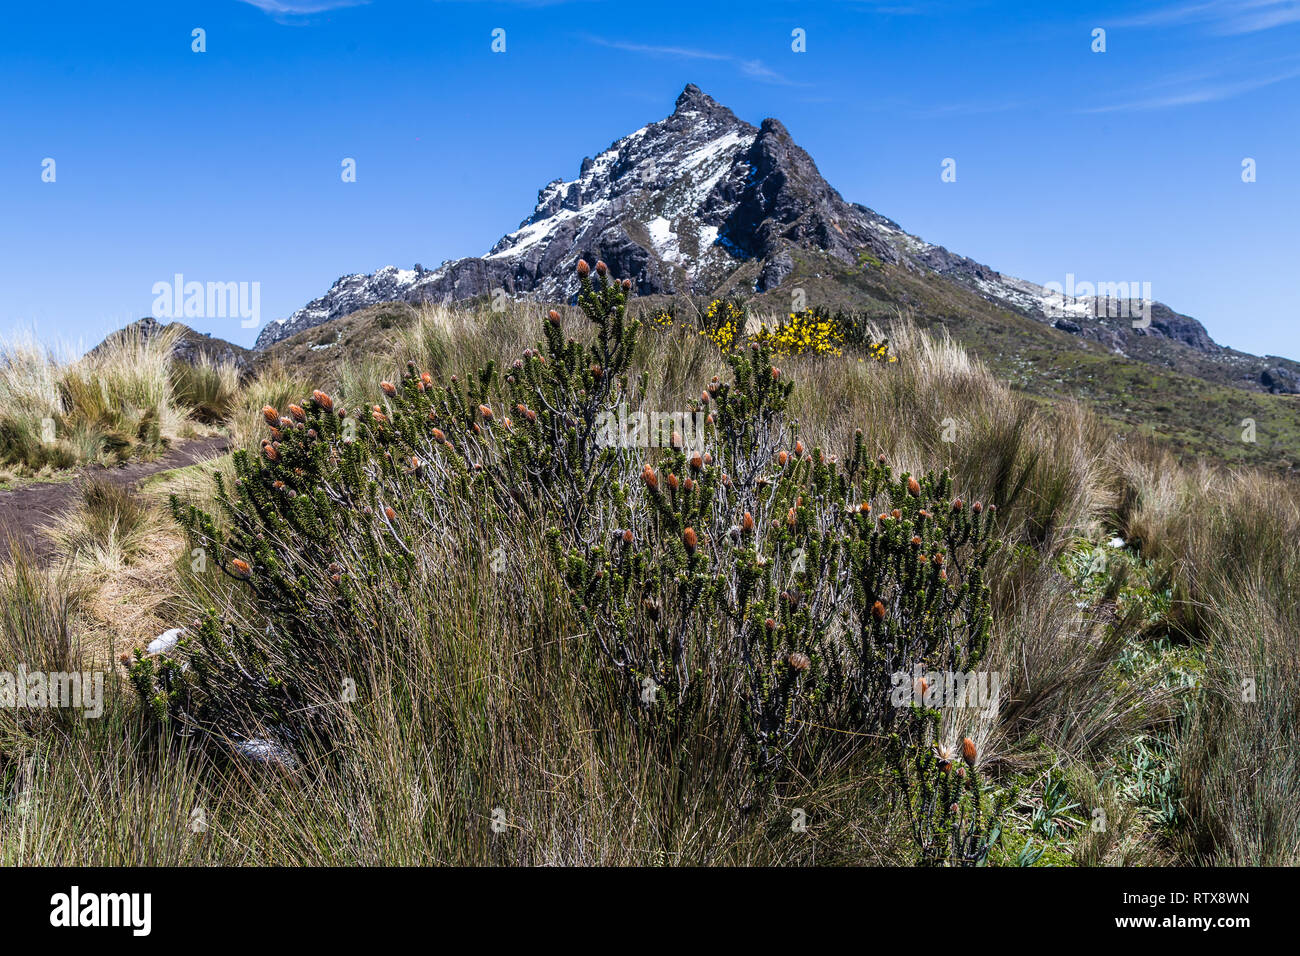 Shrubs with flowers in the páramos of Rucu Pichincha Stock Photo